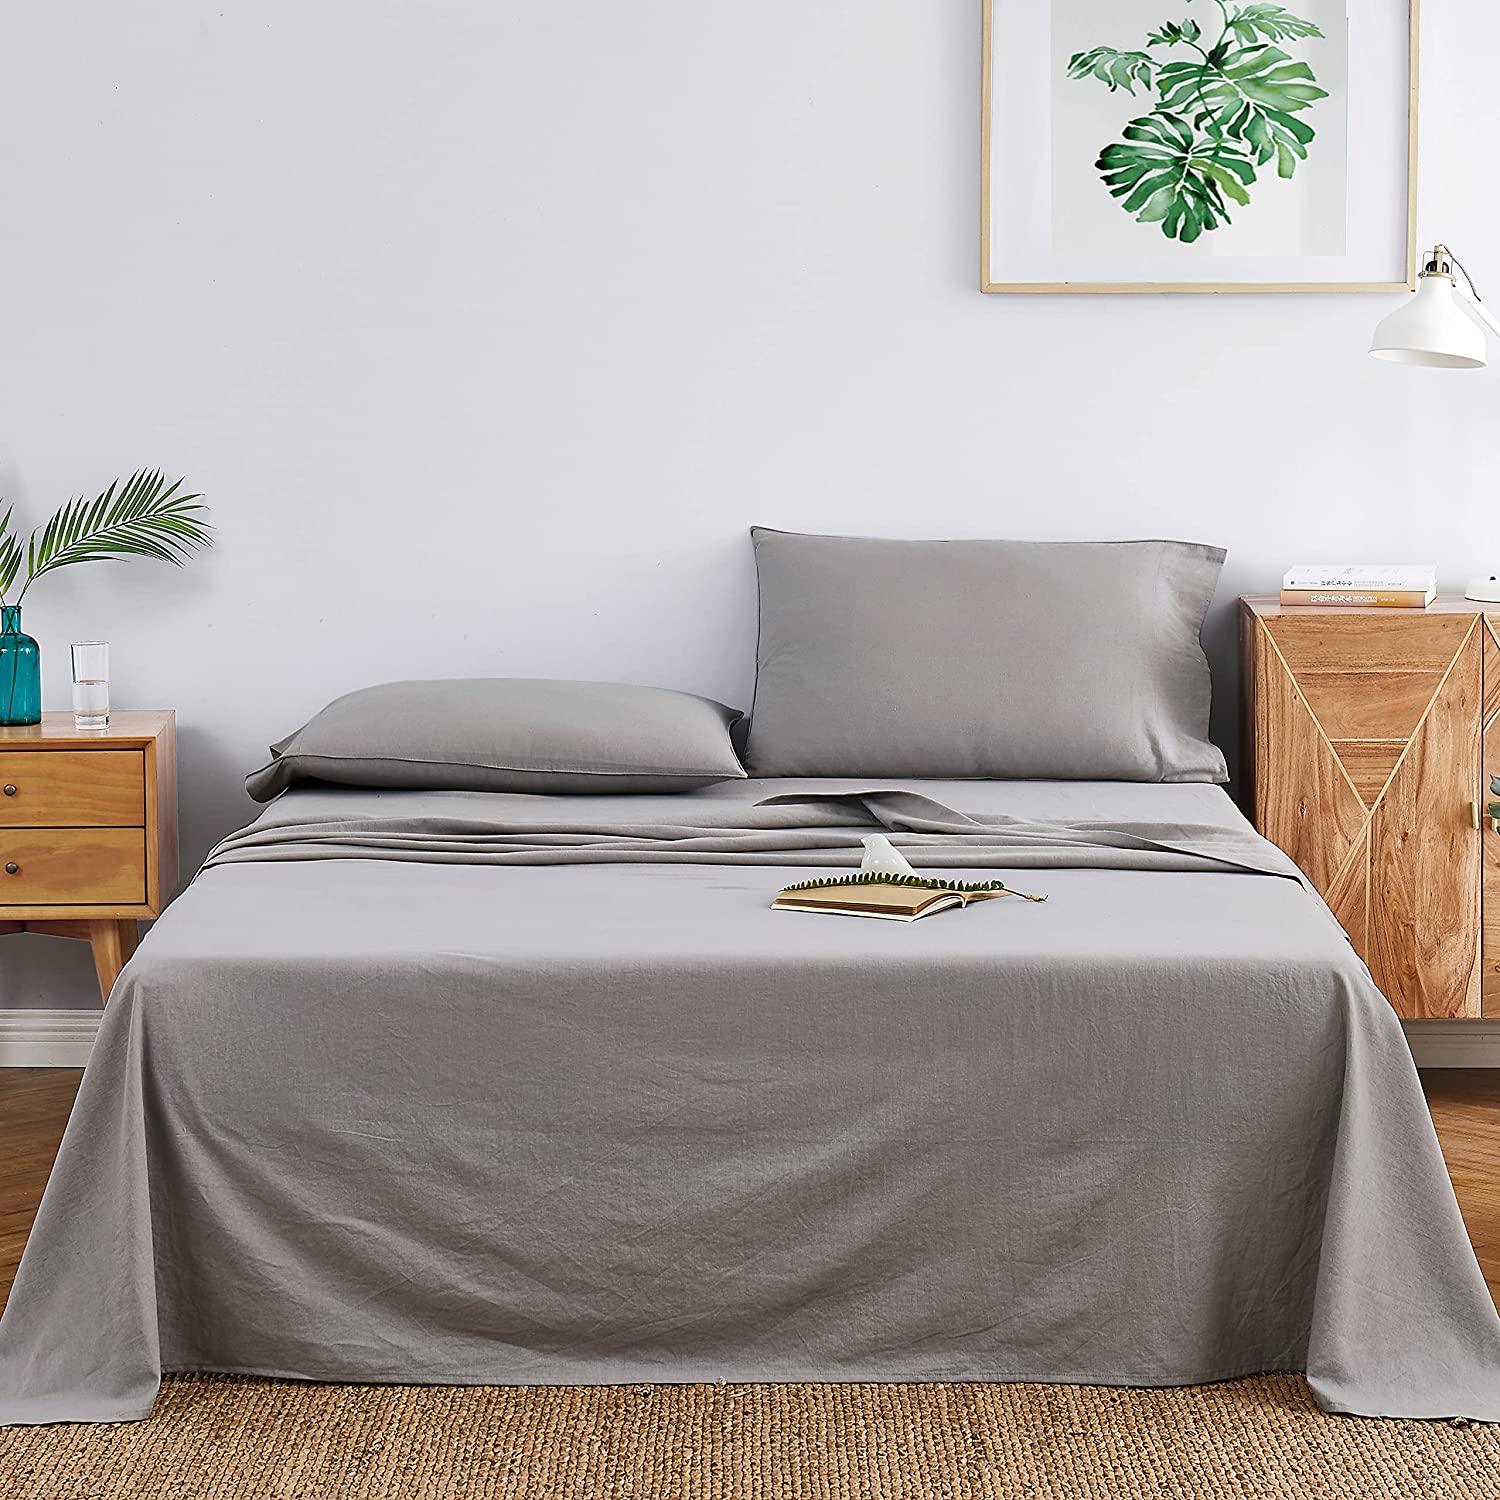  DAPU Pure Linen Sheets Set, 100% French Linen from